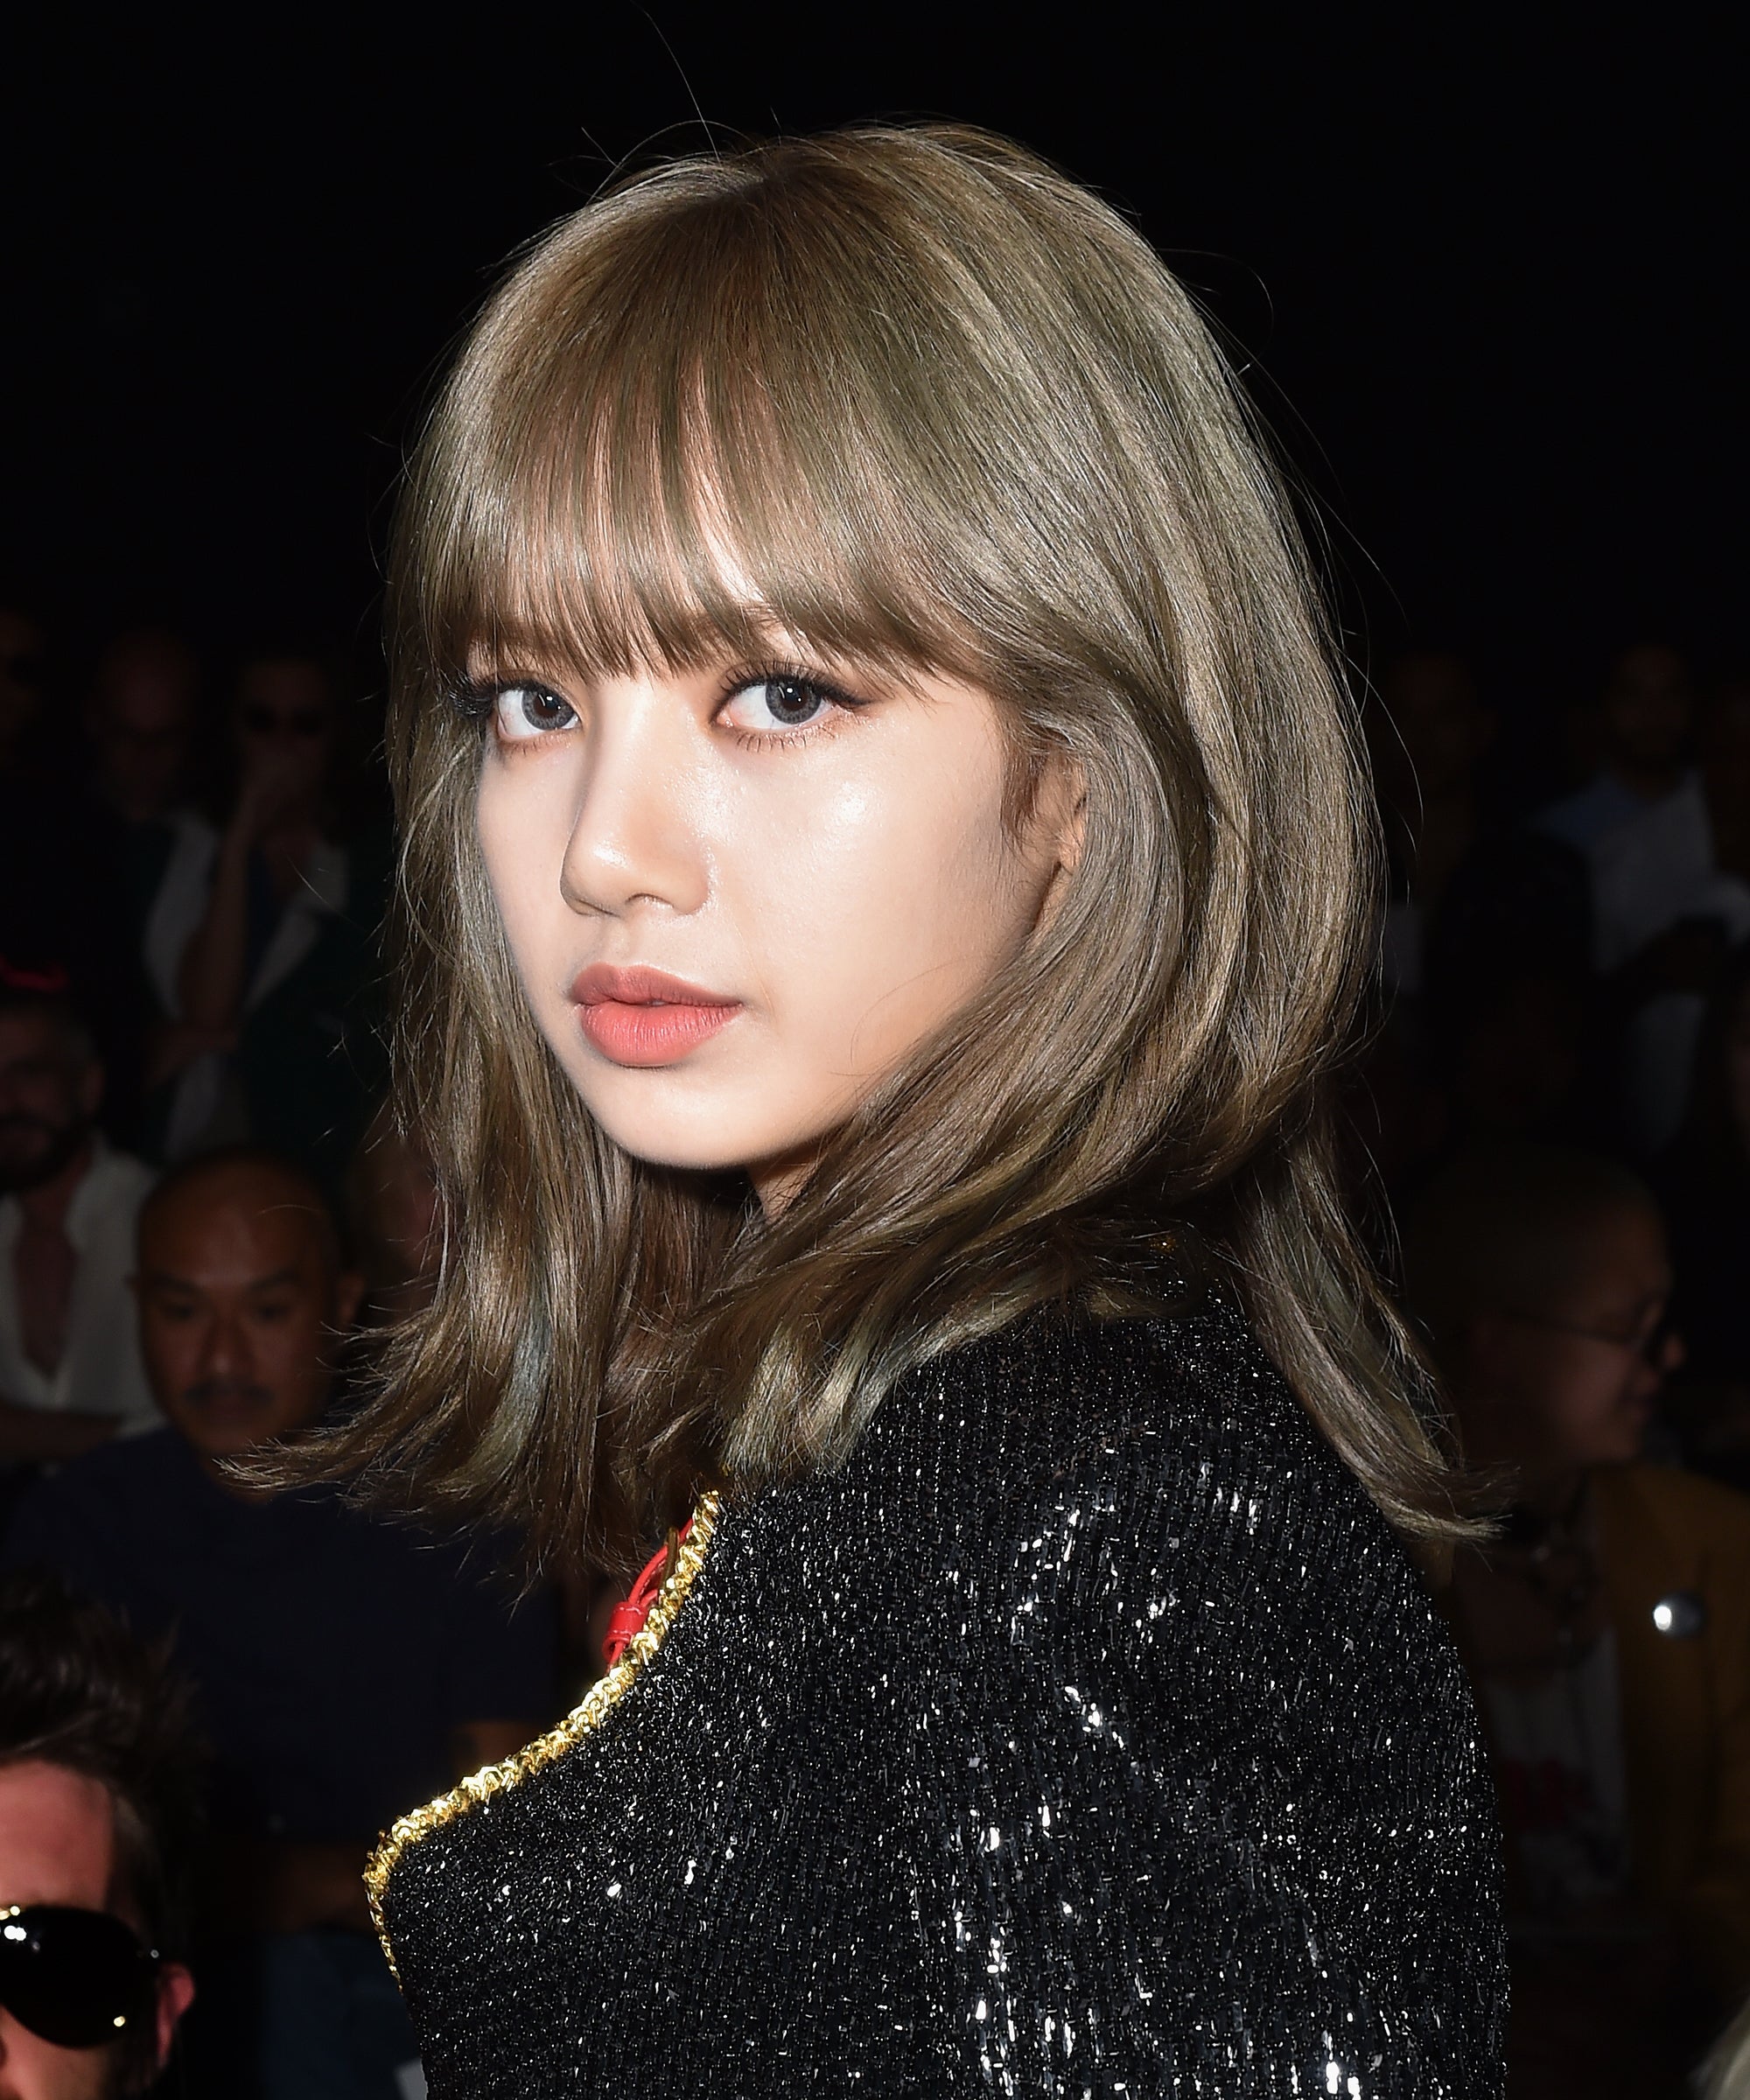 The Best Looks Of All Time From Blackpink's Lisa